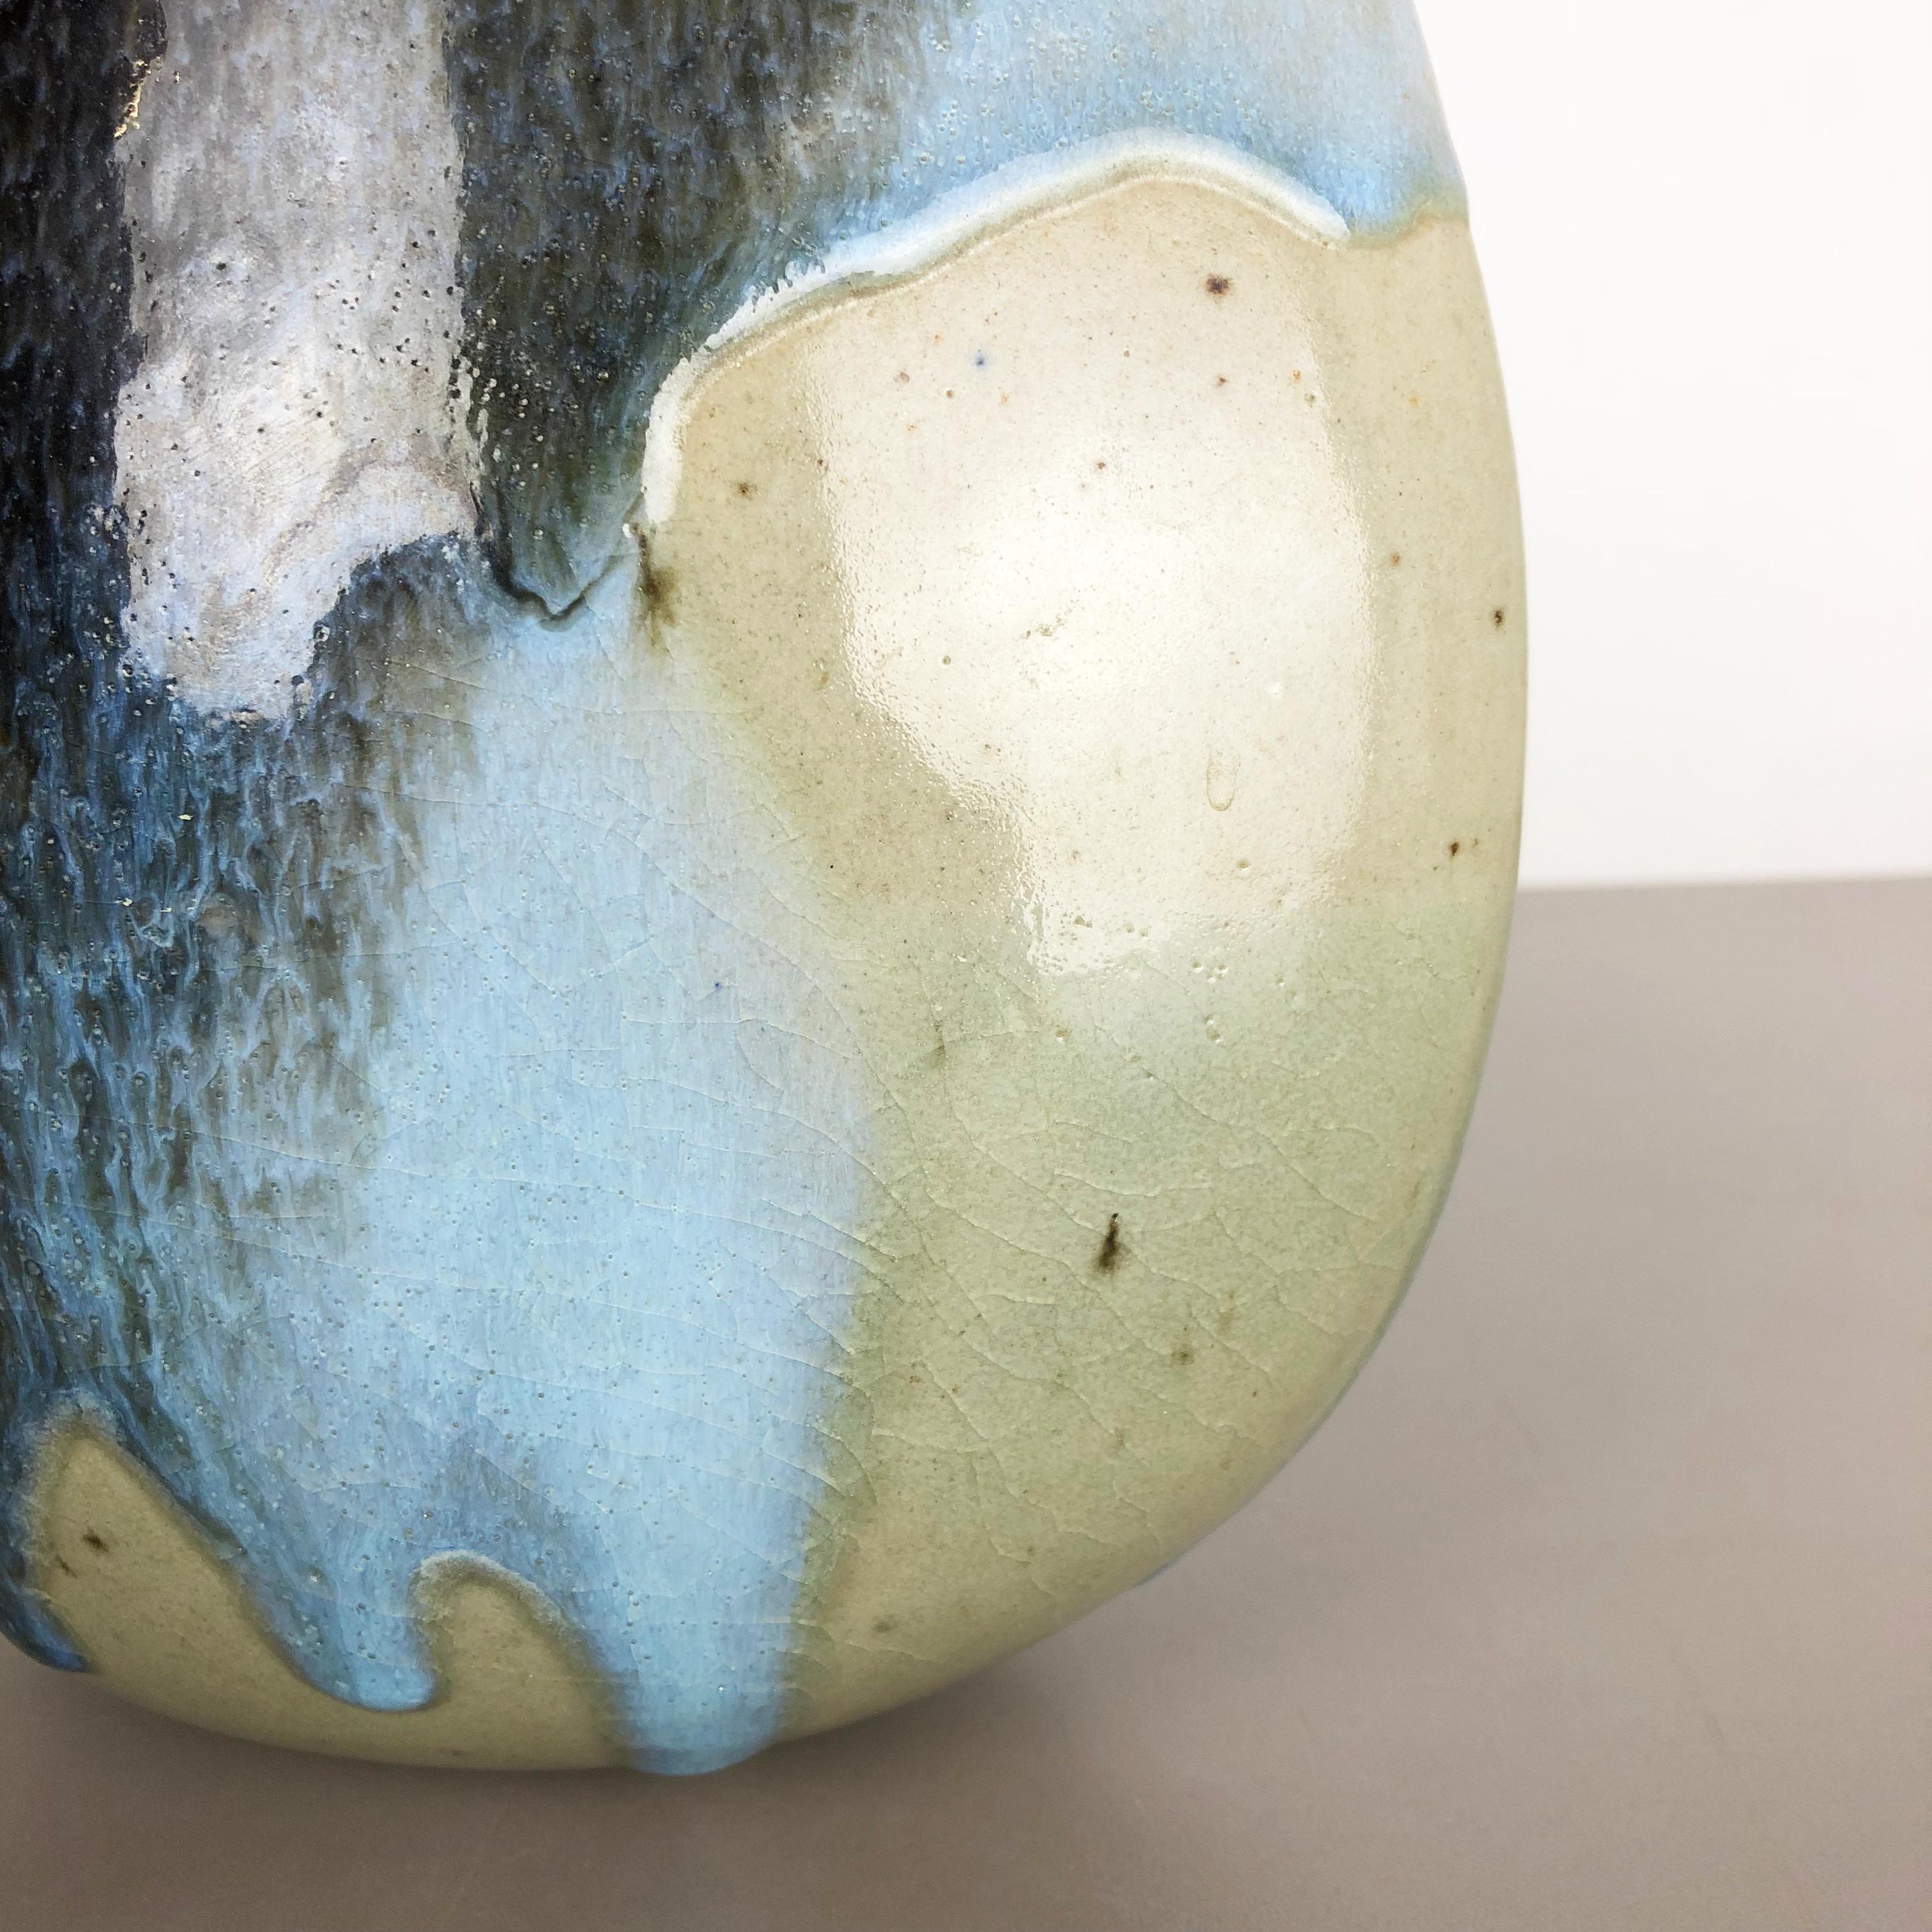 Abstract Ceramic Studio Stoneware Vase by Gotlind Weigel, Germany, 1960s For Sale 6